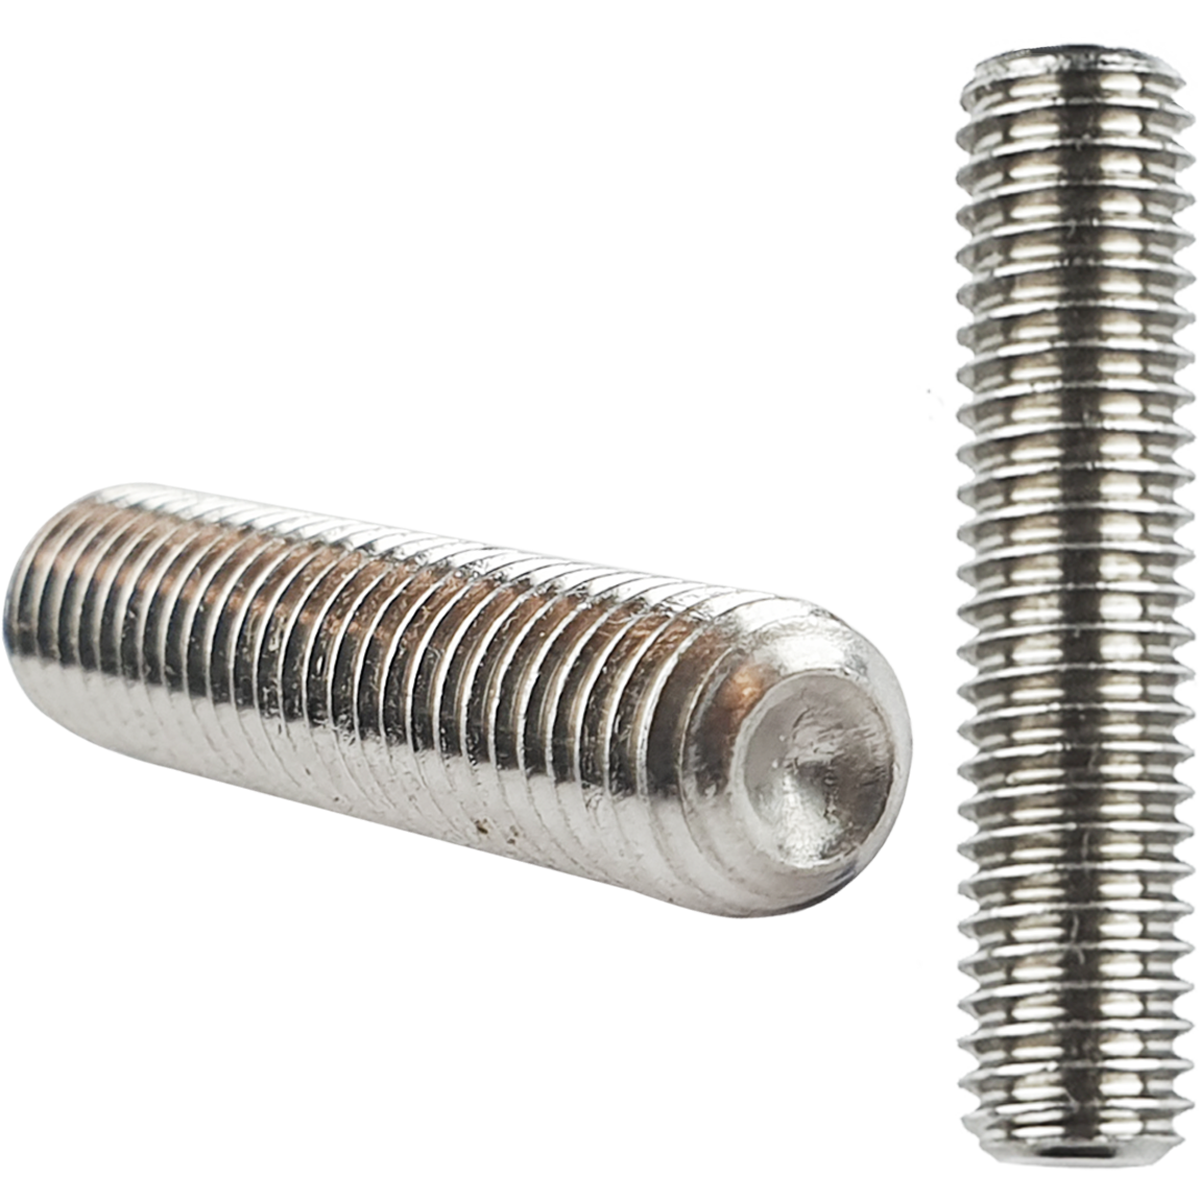 Cup point socket set screws. Also known as hex set screws or grub screws are available at great prices. Manufactured in stainless steel for resistance to corrosion